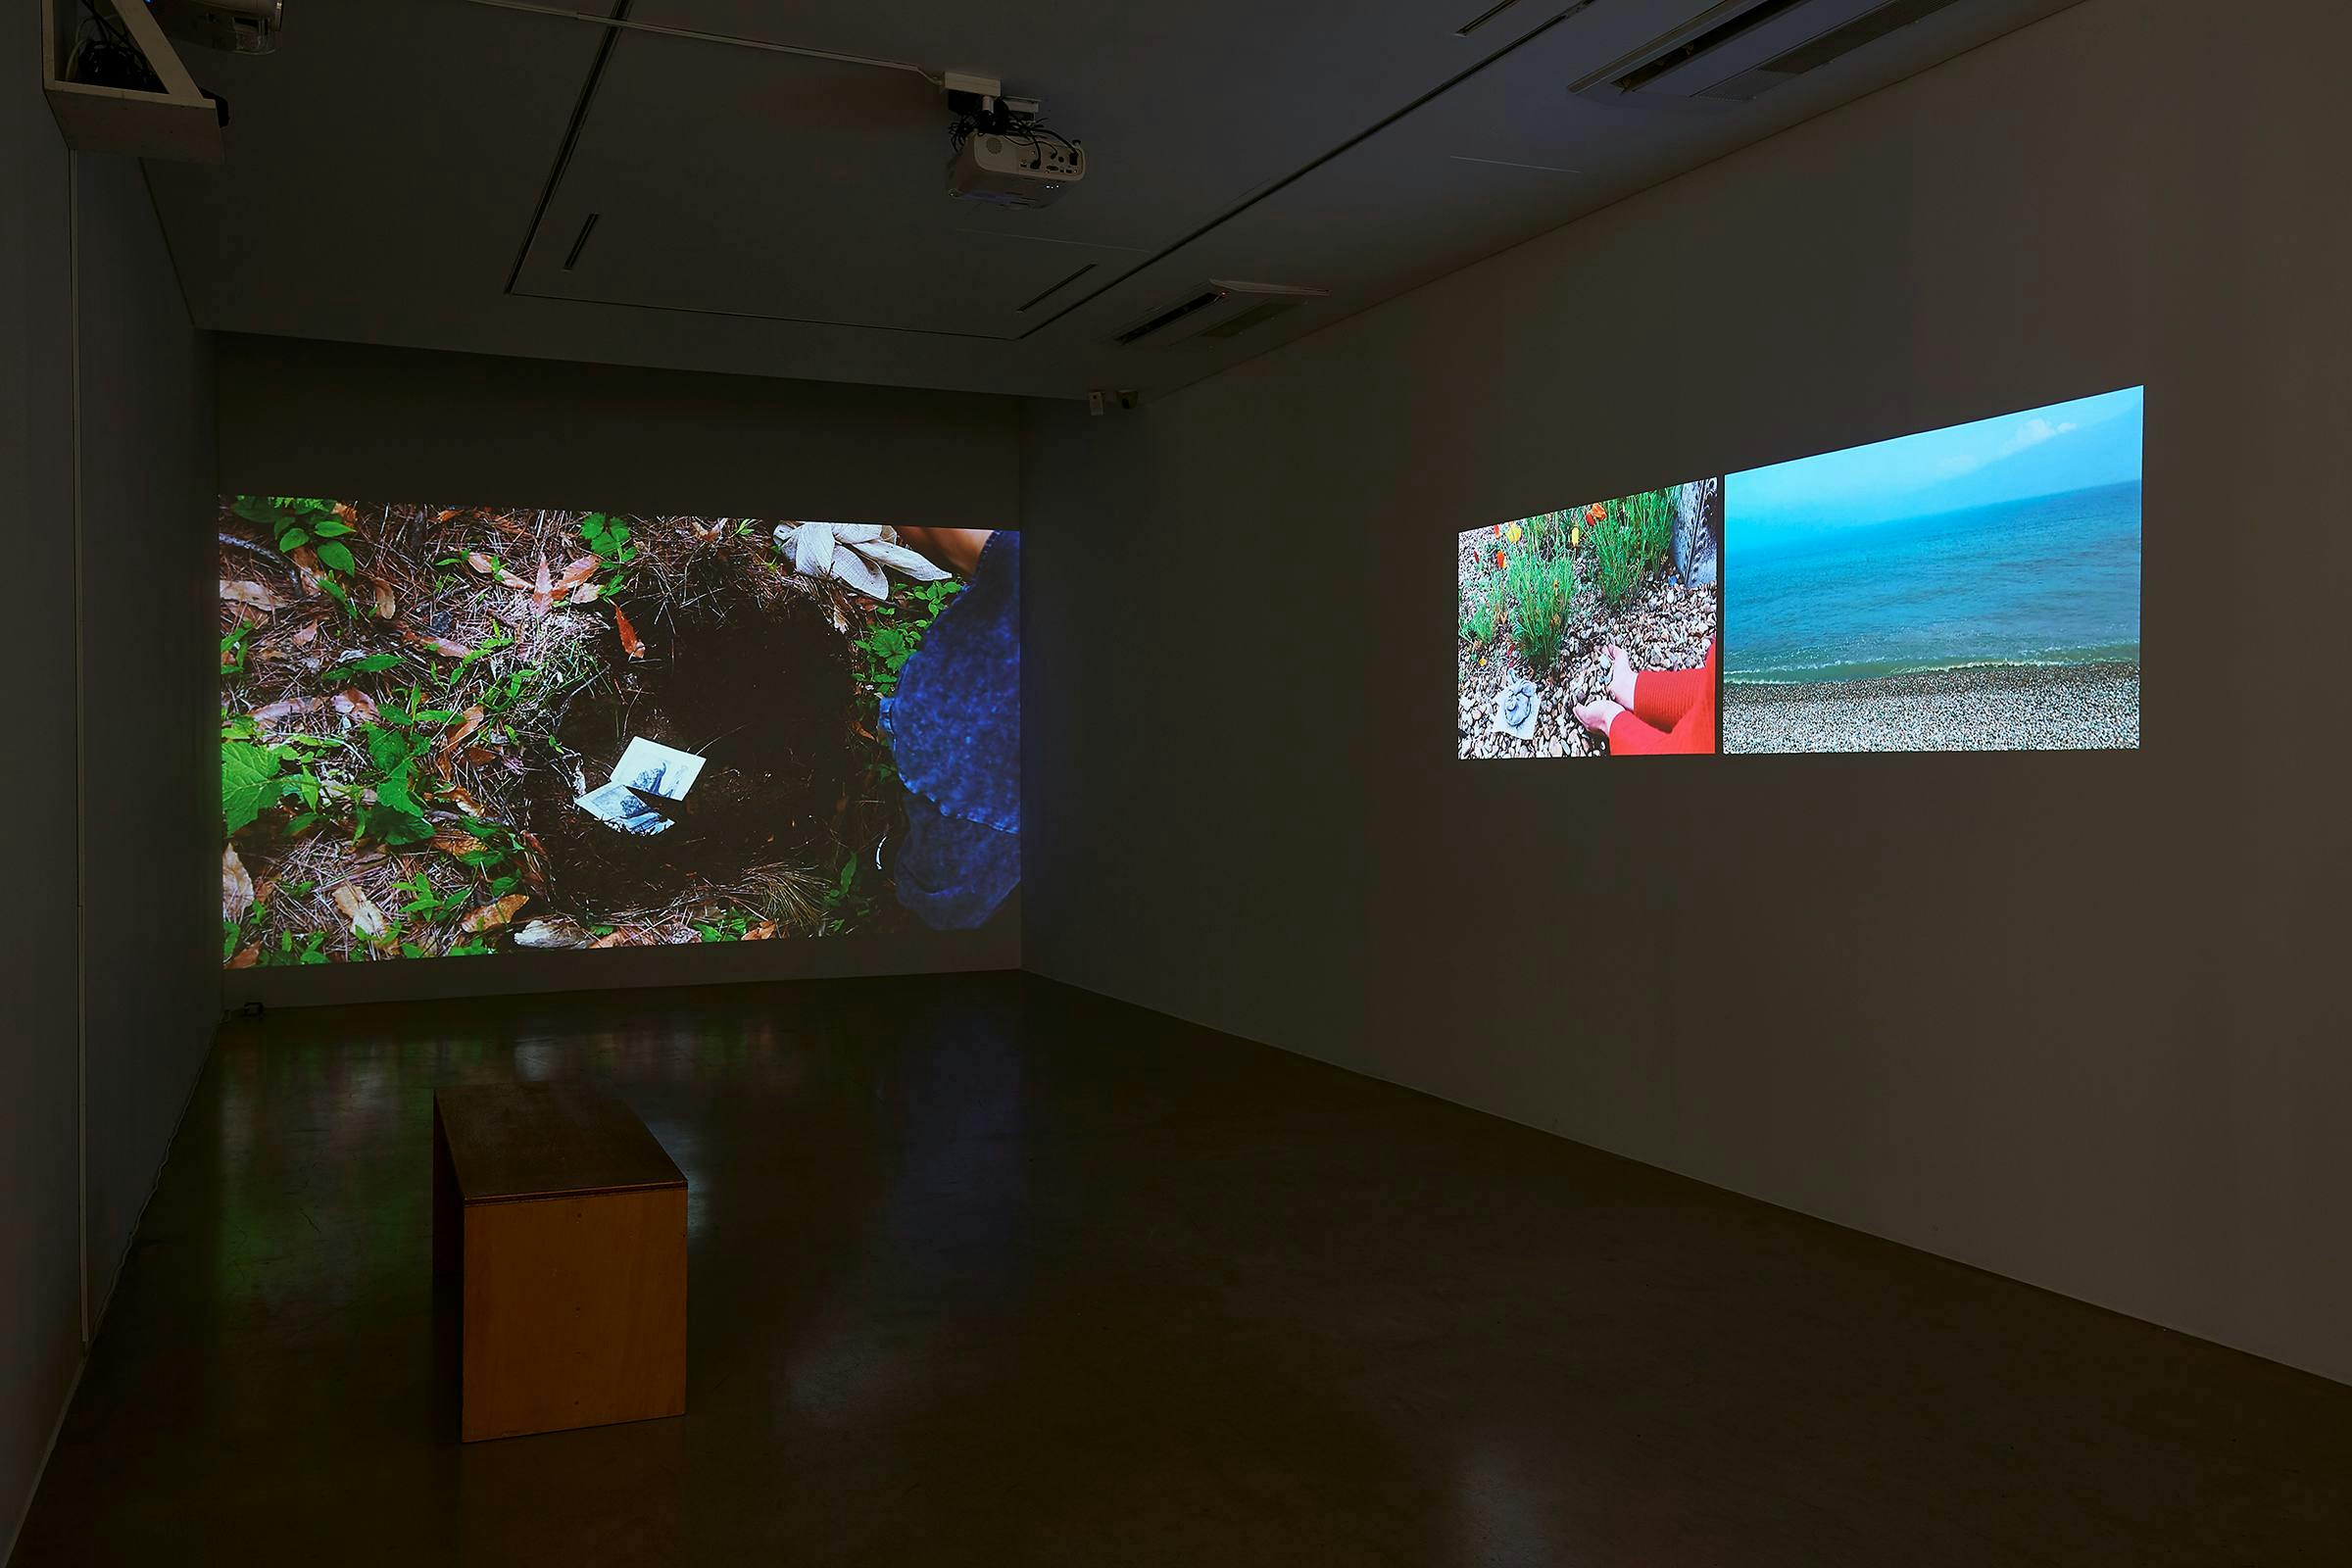 an installation view of the work Garden installed in a darkened space. 2 projections are visible as is a wooden bench